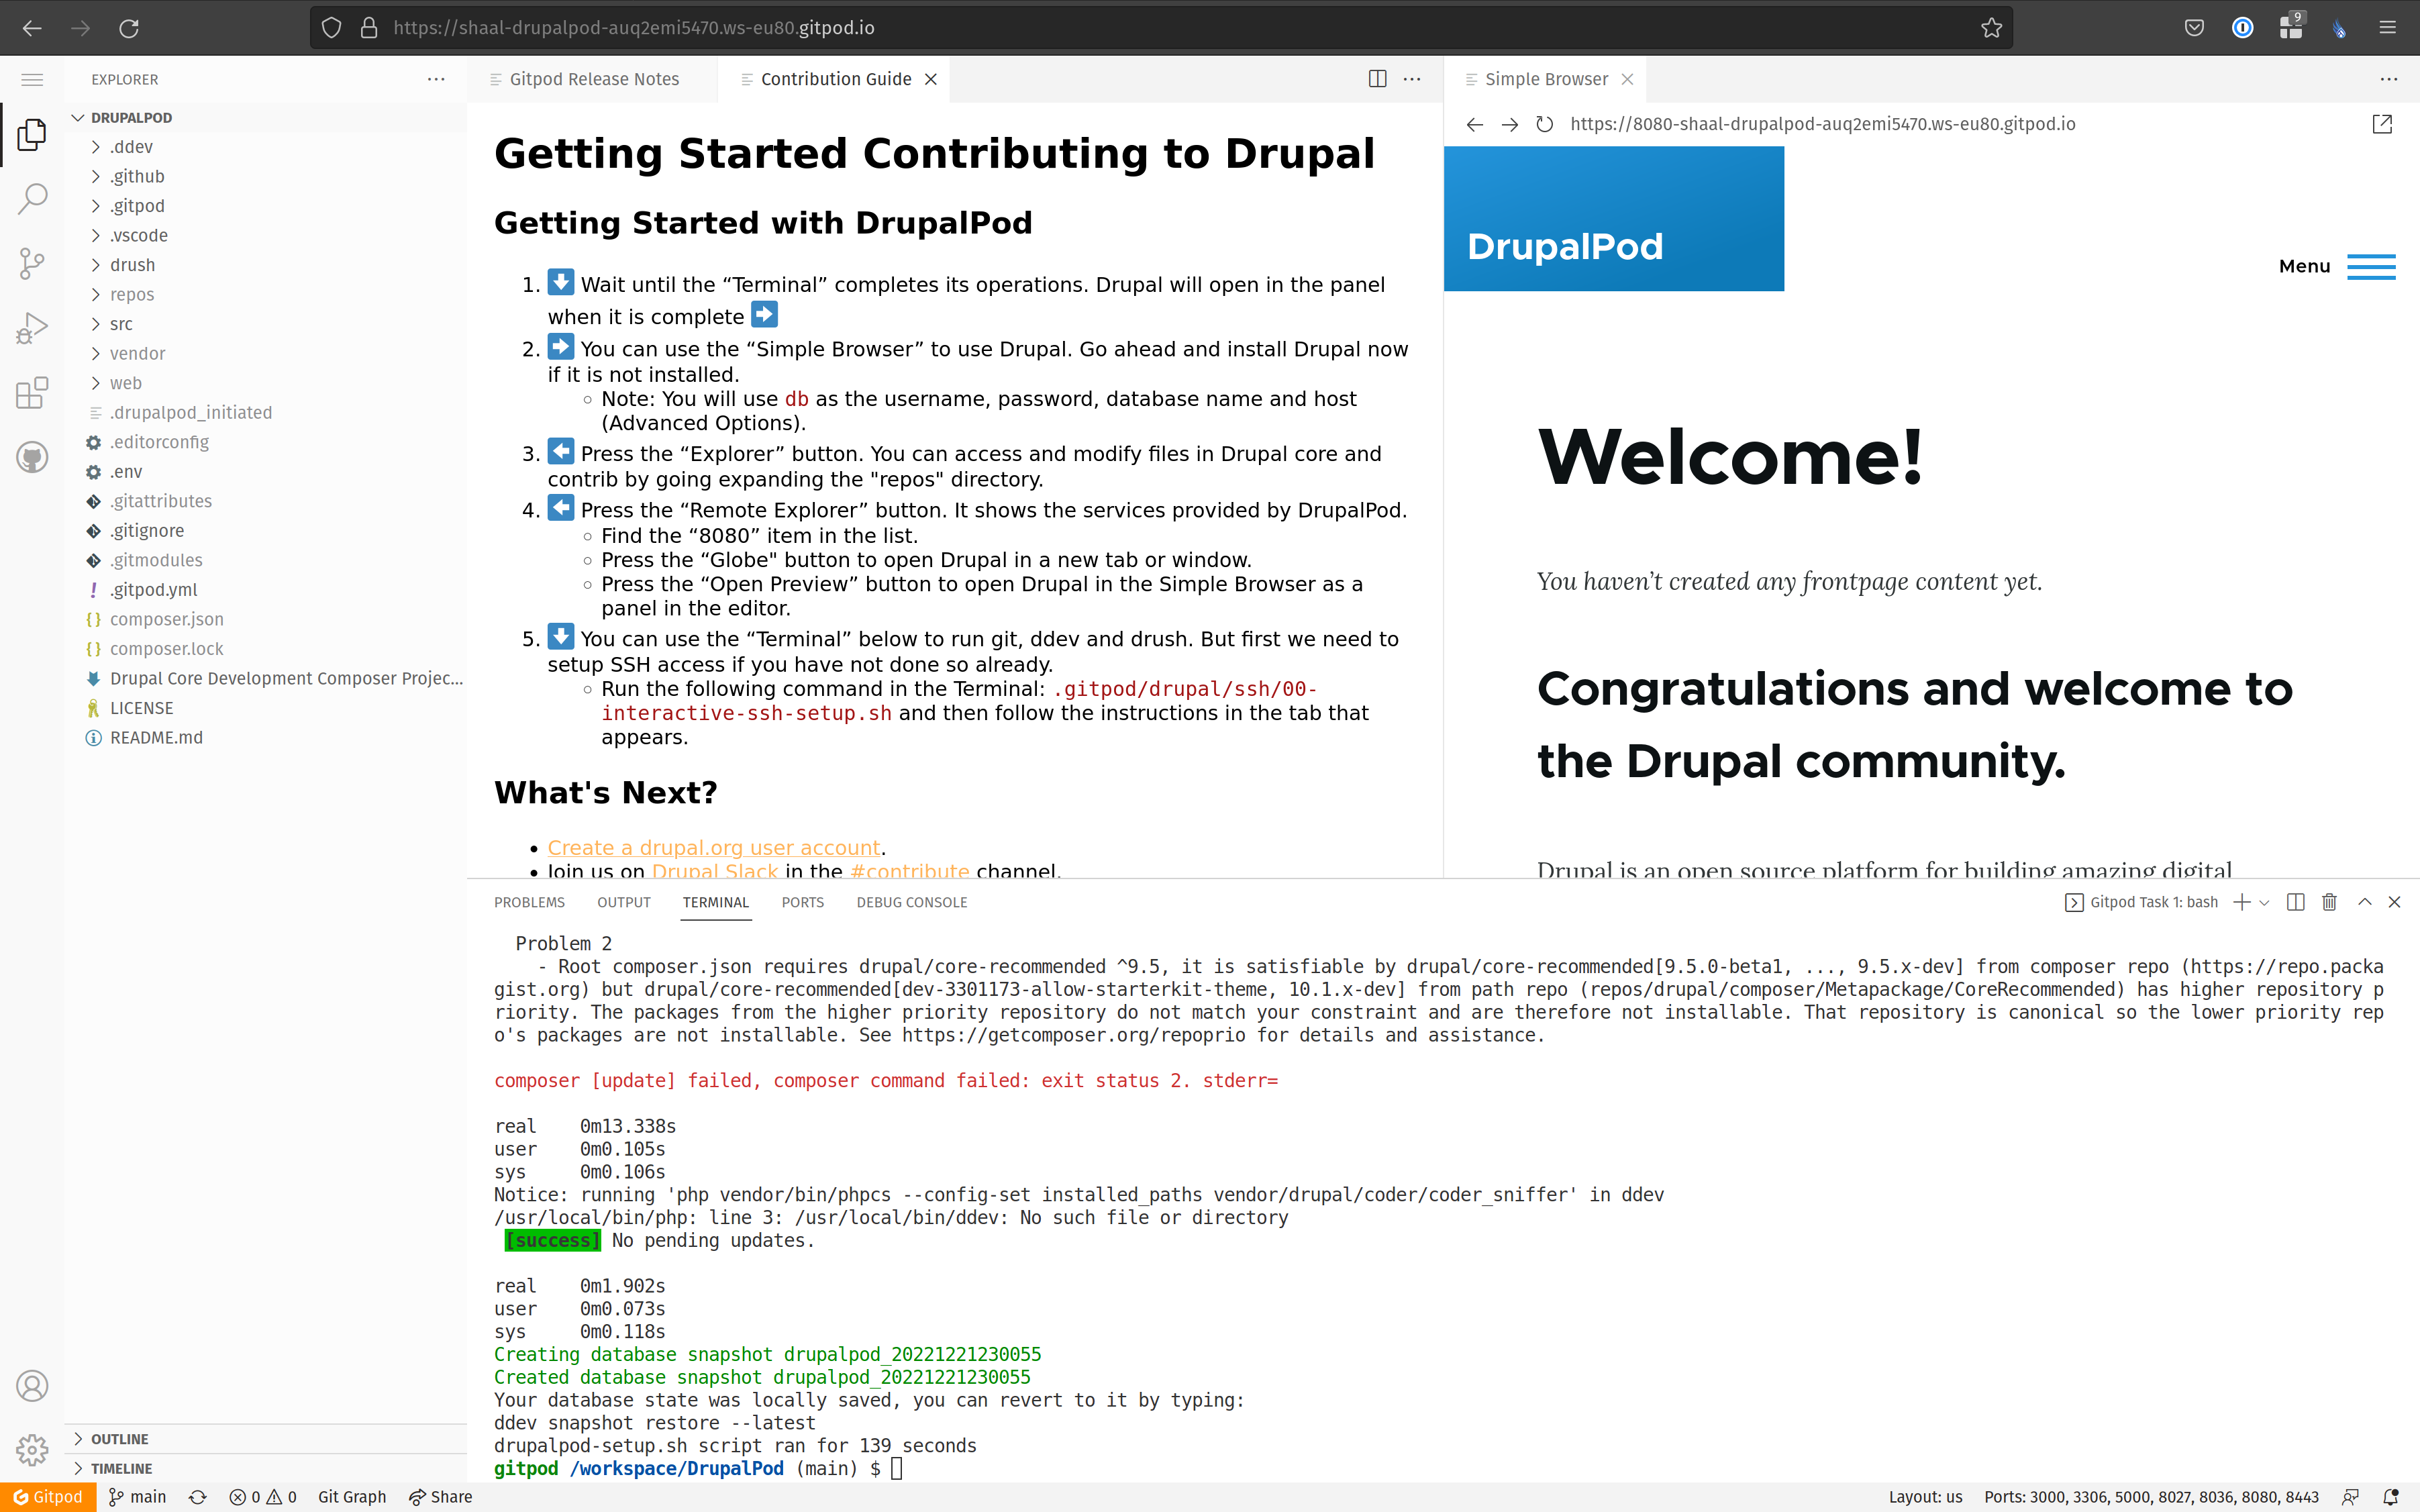 DrupalPod environment ready to use